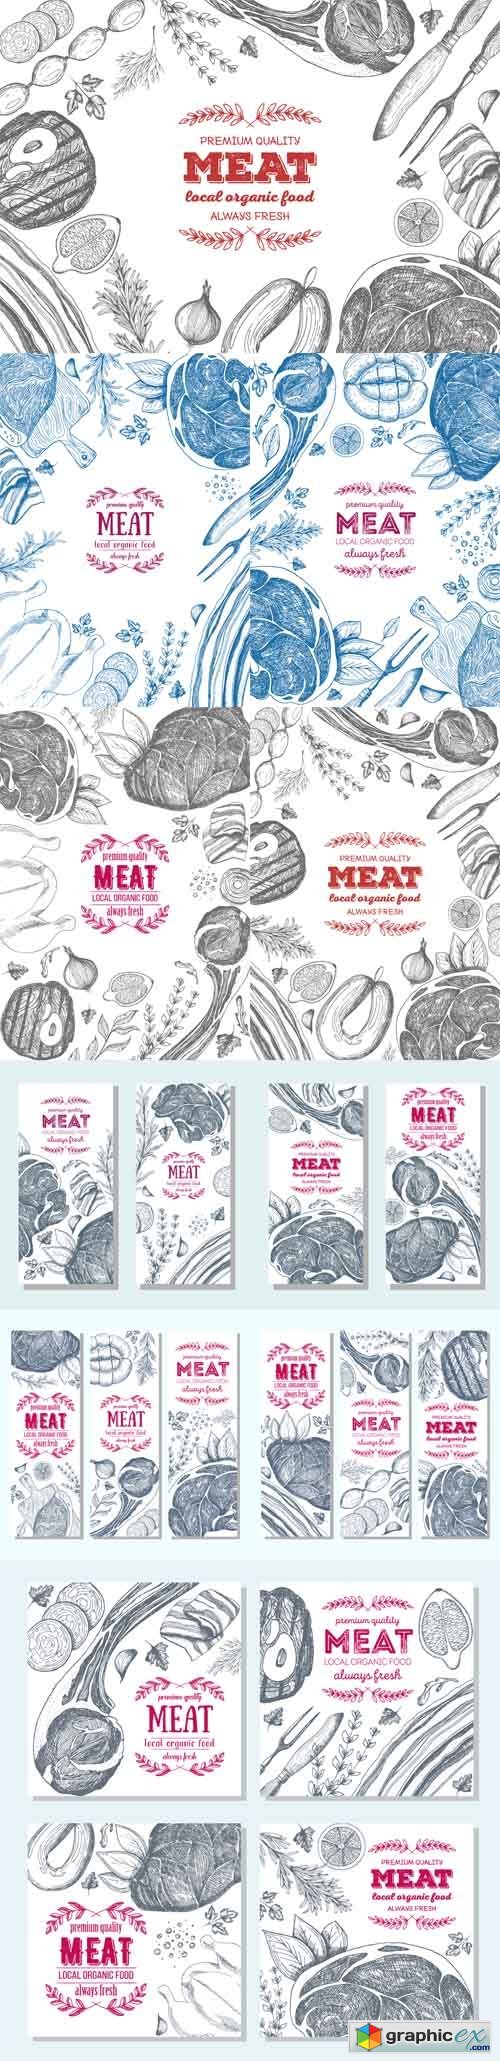 Meat Banners and Frames. Linear Graphic. Vintage Illustrations